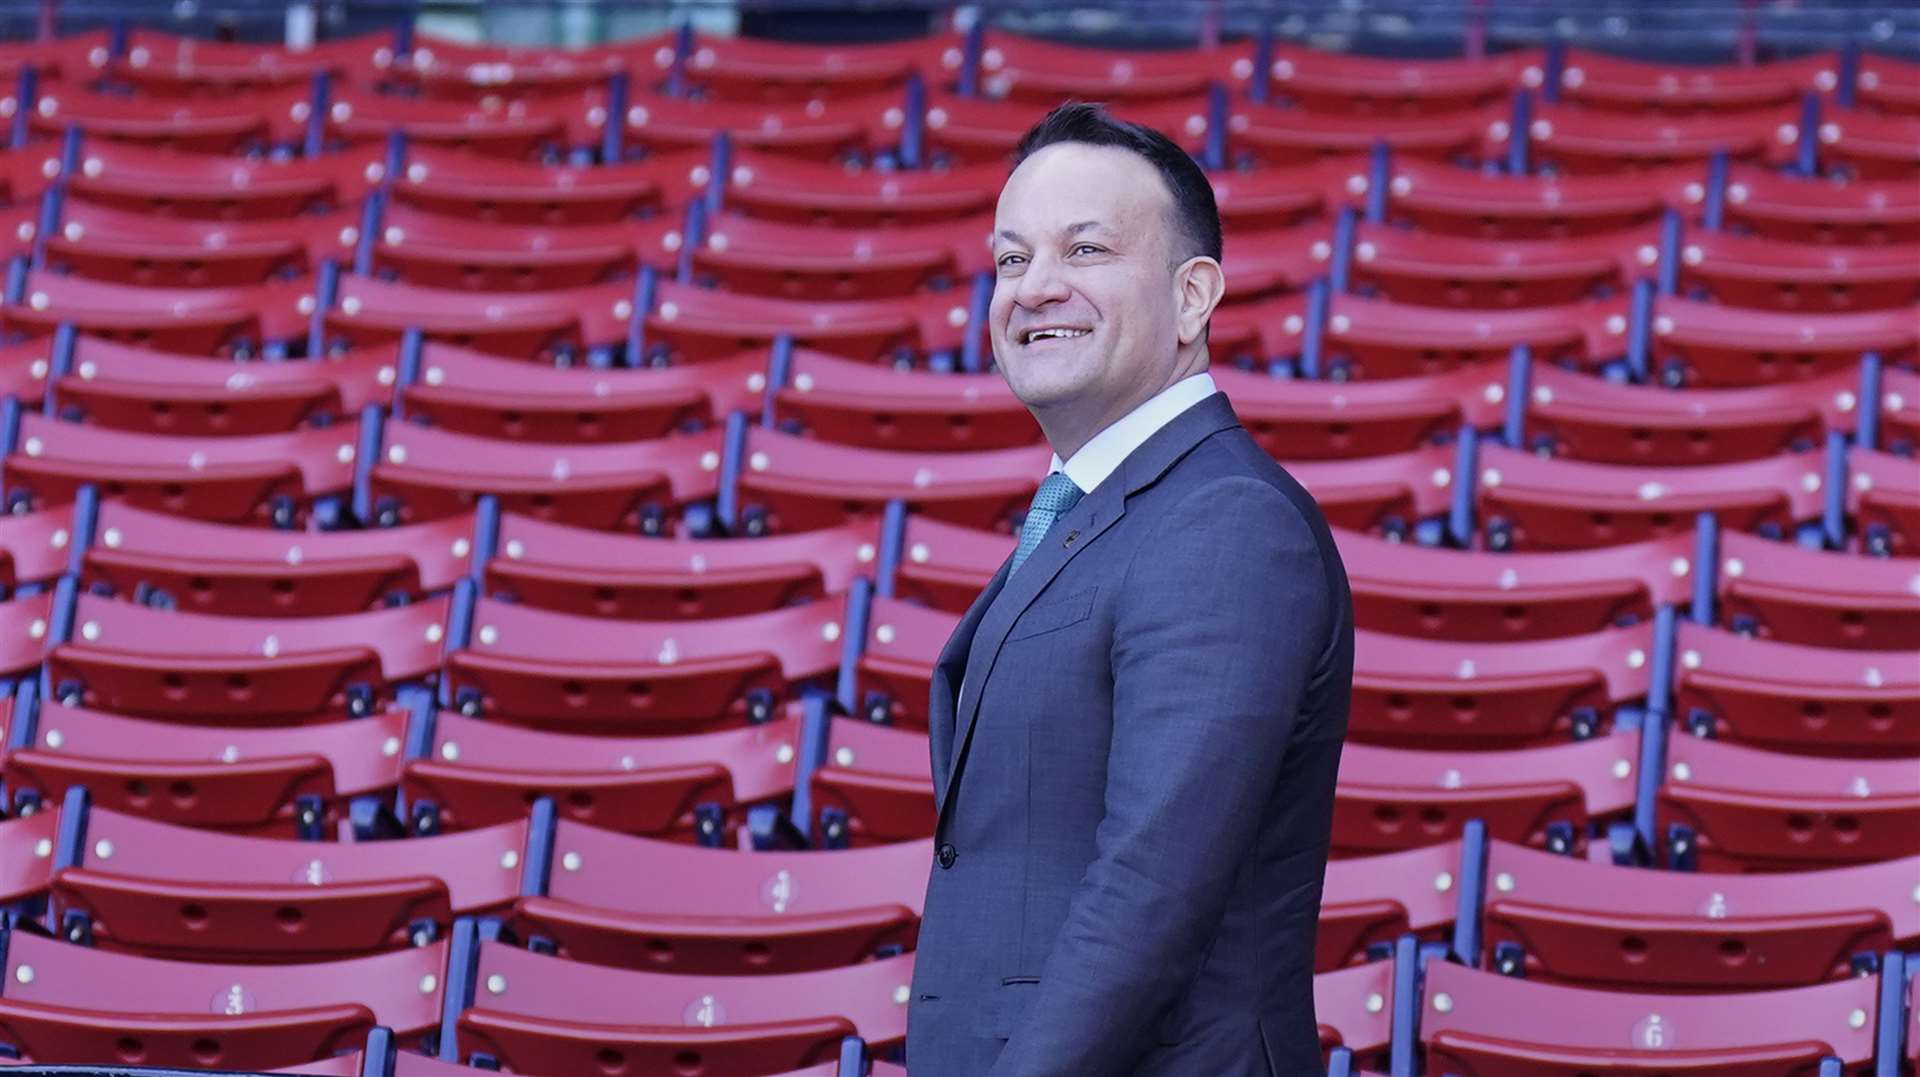 Leo Varadkar in the stands at Fenway park (Niall Carson/PA)